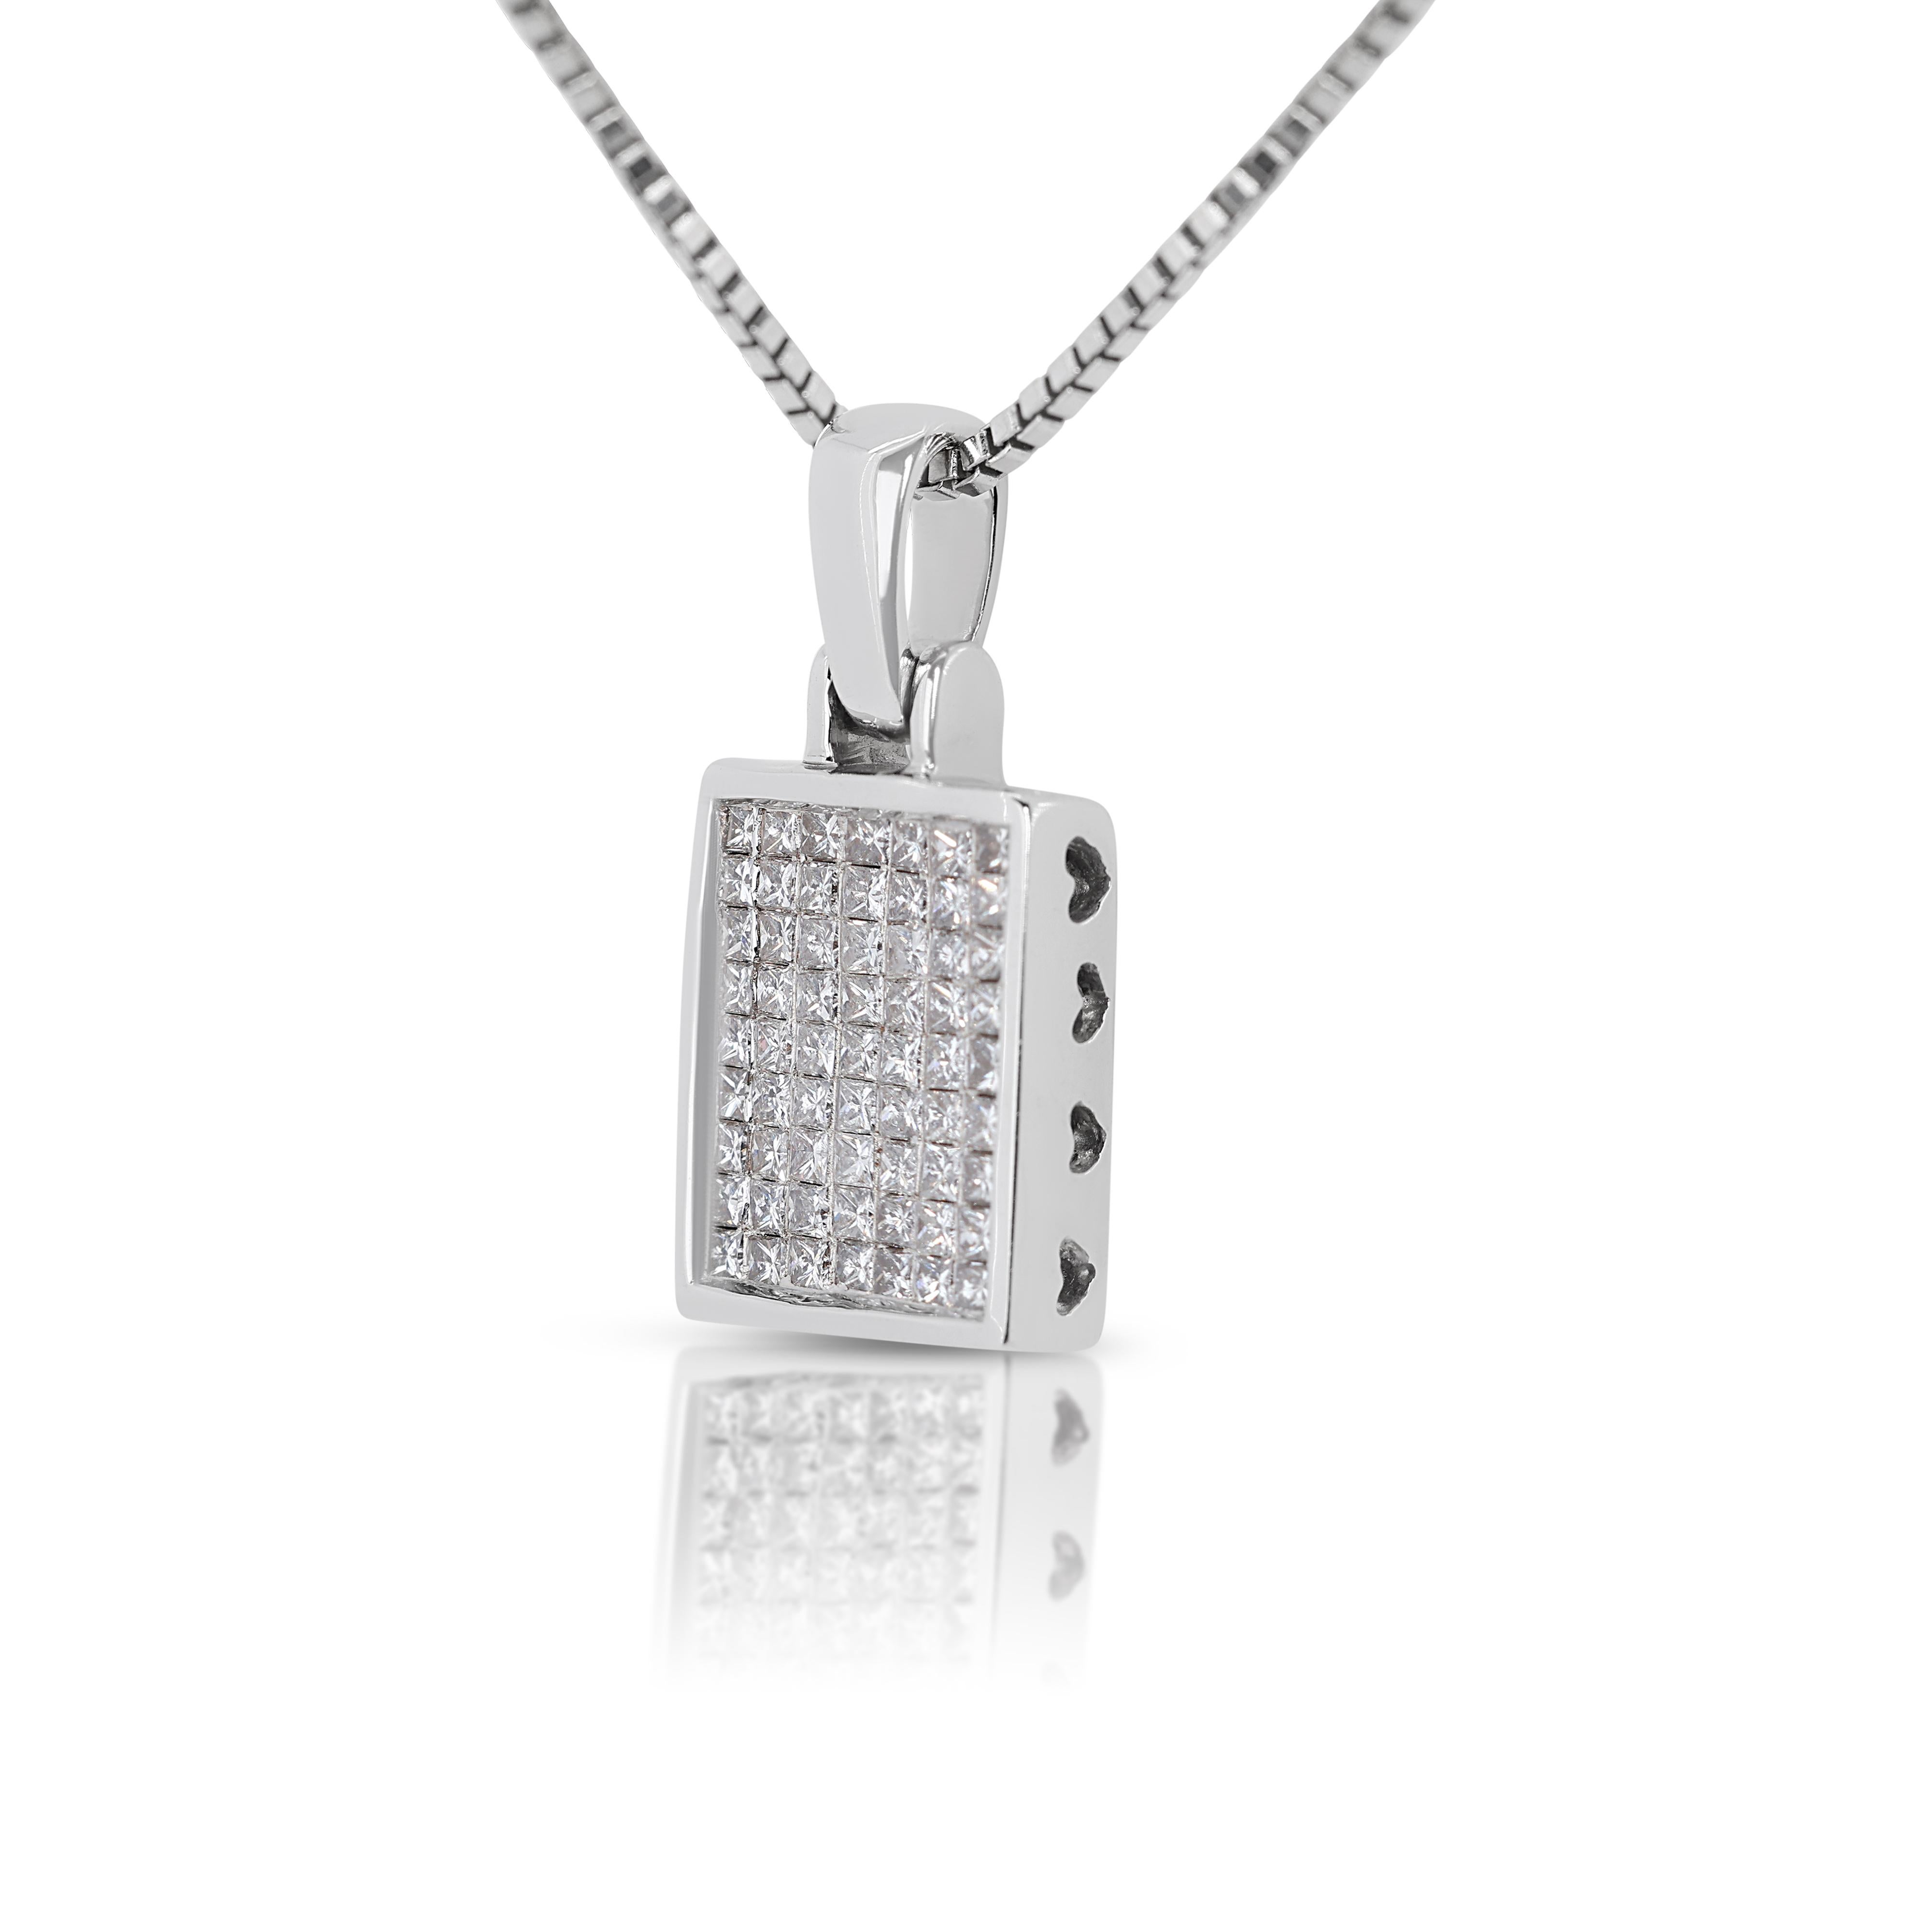 Princess Cut Dazzling 0.63ct Diamonds Pendant in 18K White Gold - (Chain Not Included) For Sale